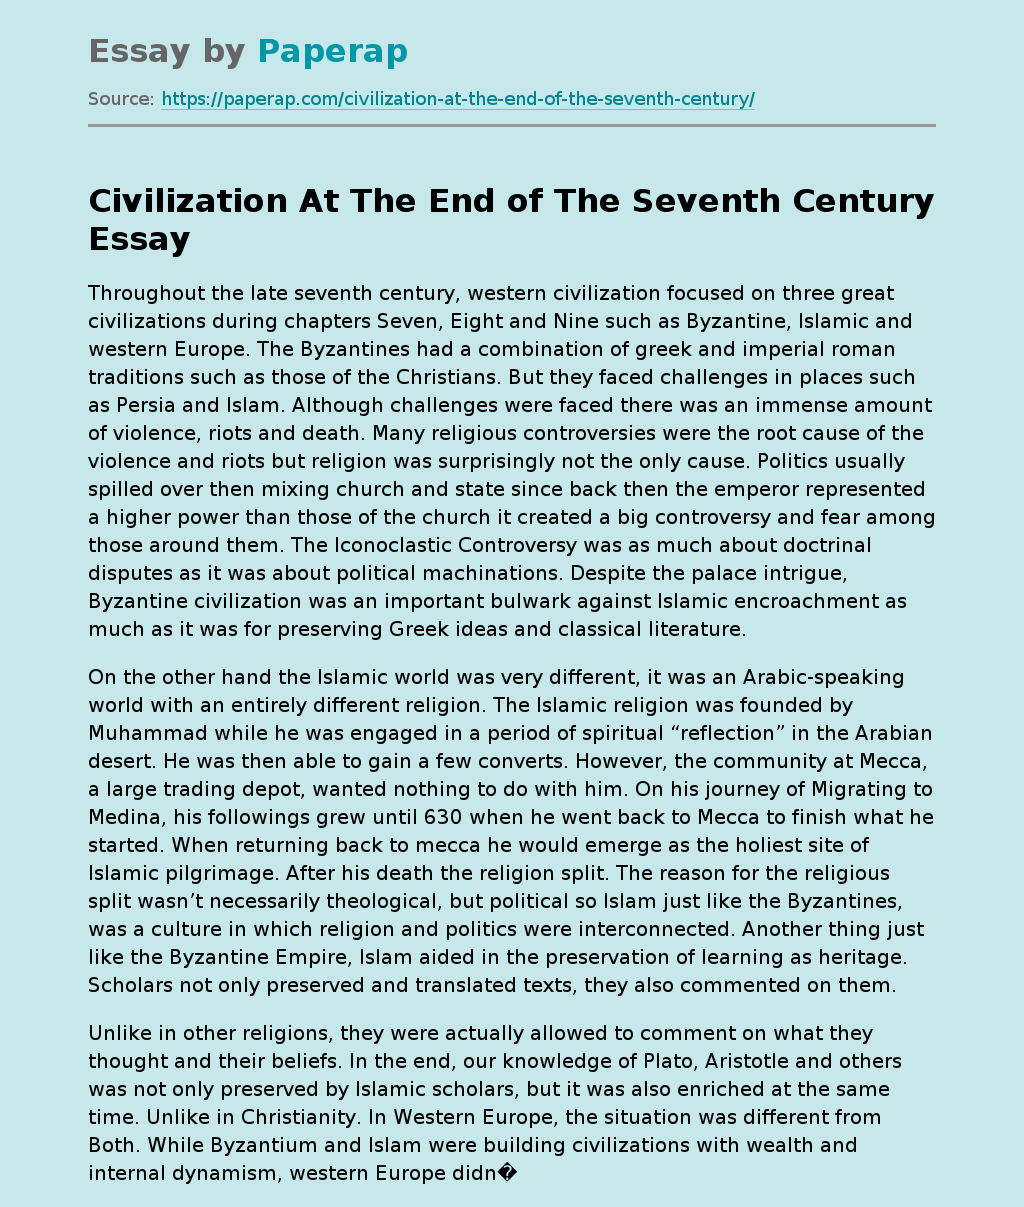 Civilization At The End of The Seventh Century